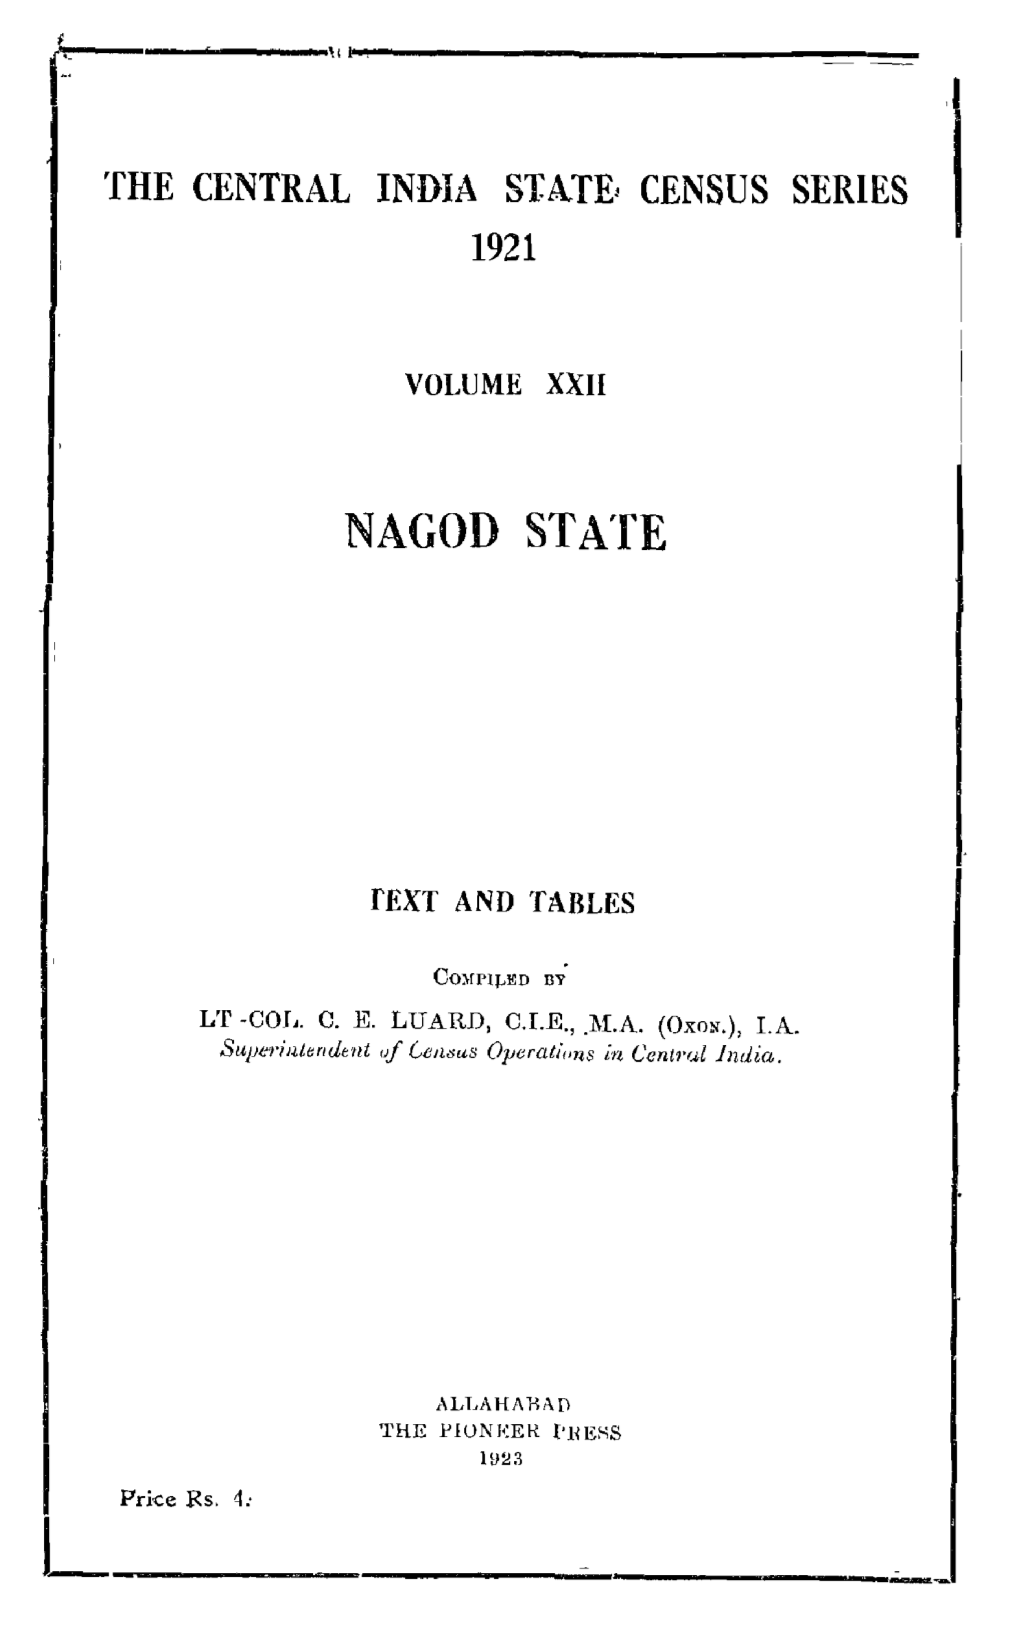 45944 the CENTRAL INDIA STATE CENSUS SERIES 1921.Pdf